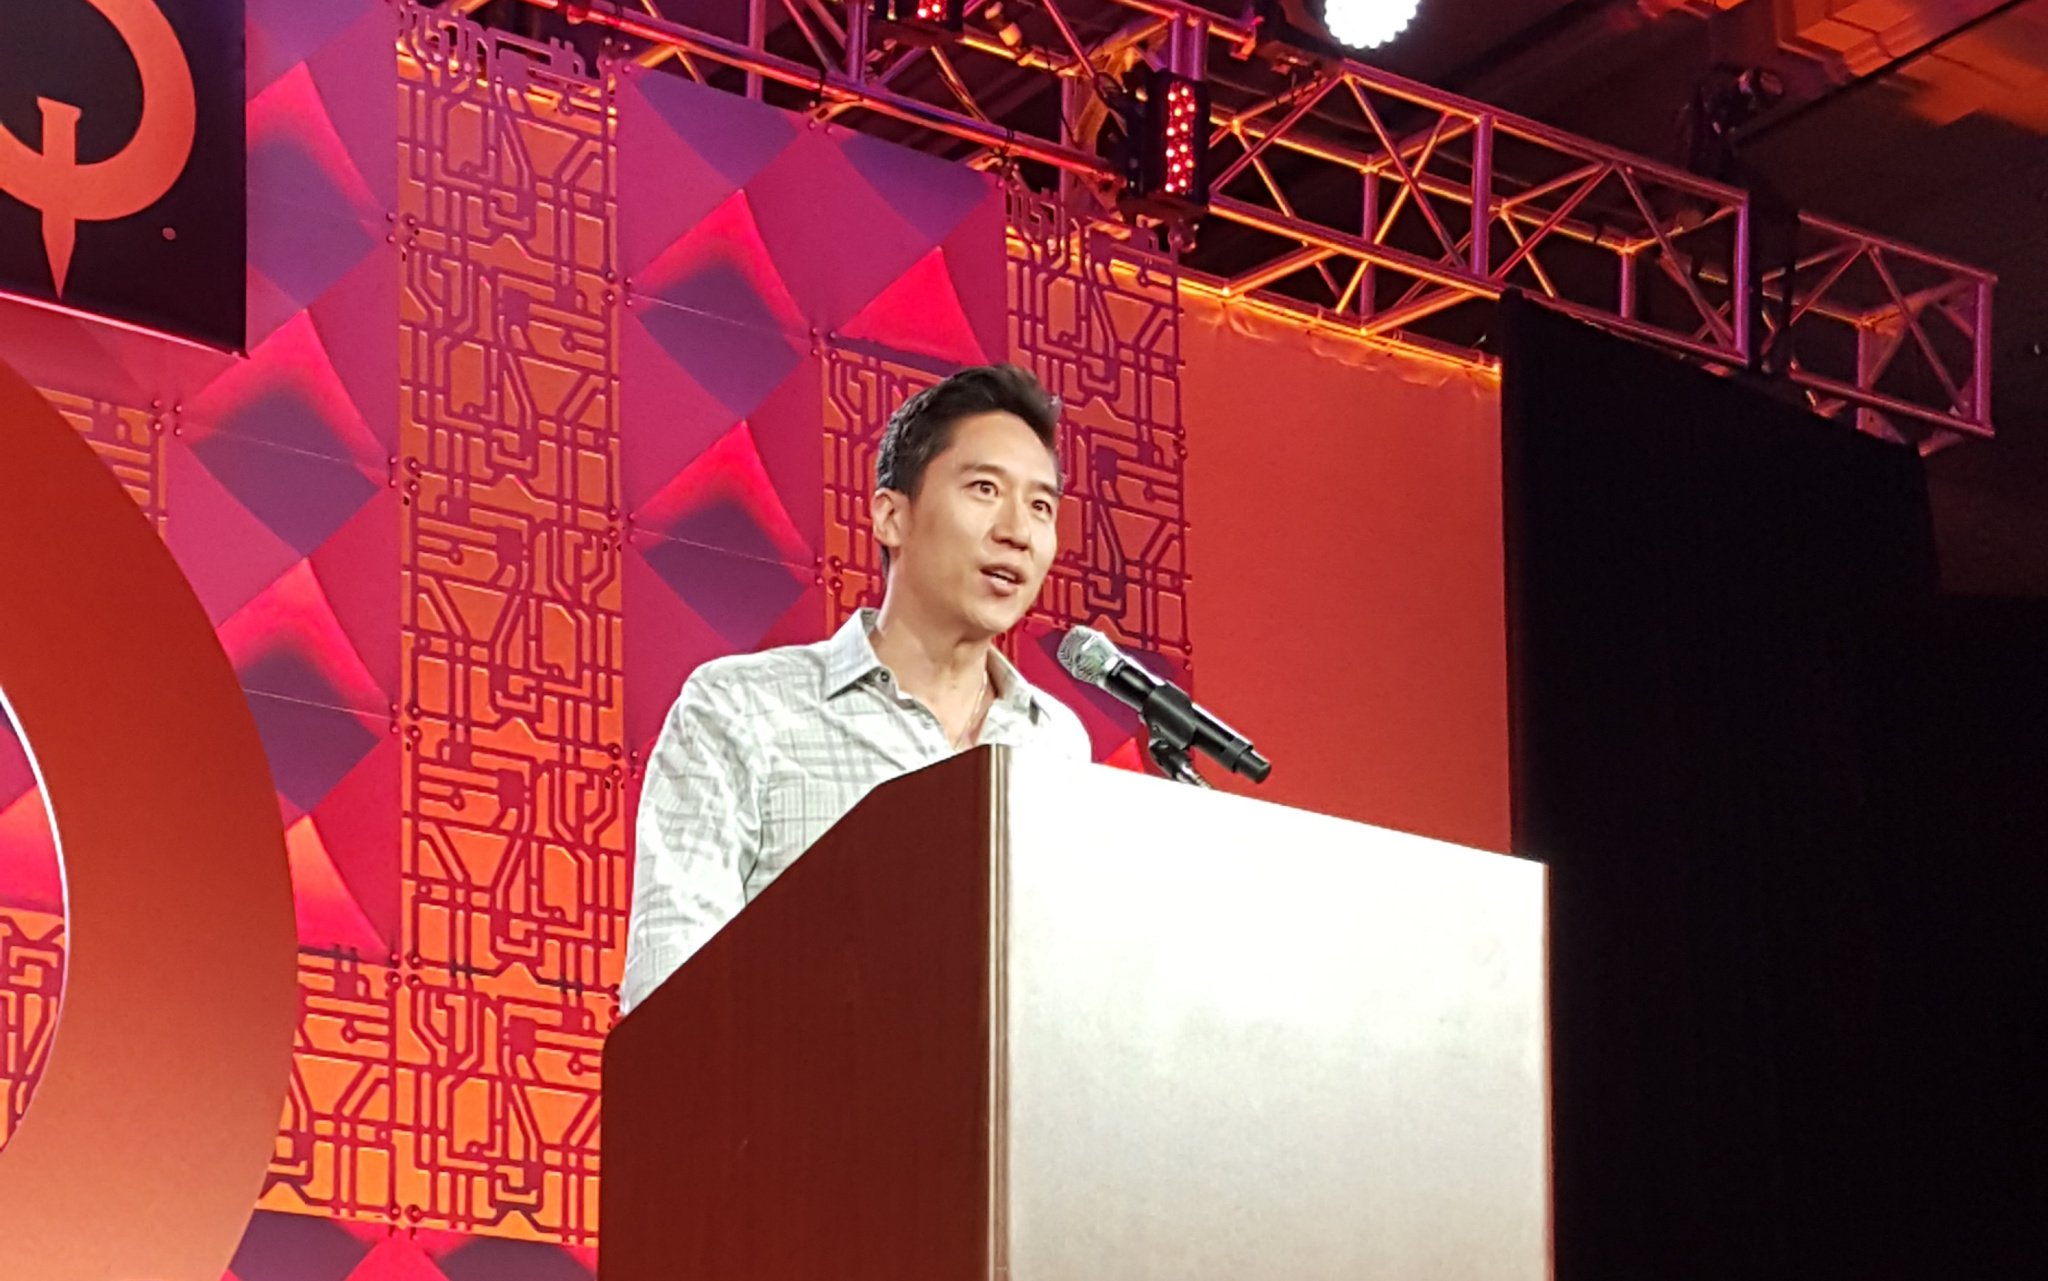 Dennis-Fong-Thresh-Esports-Hall-of-Fame-QuakeCon-2016-Induction-Ceremony-photo-main.jpg